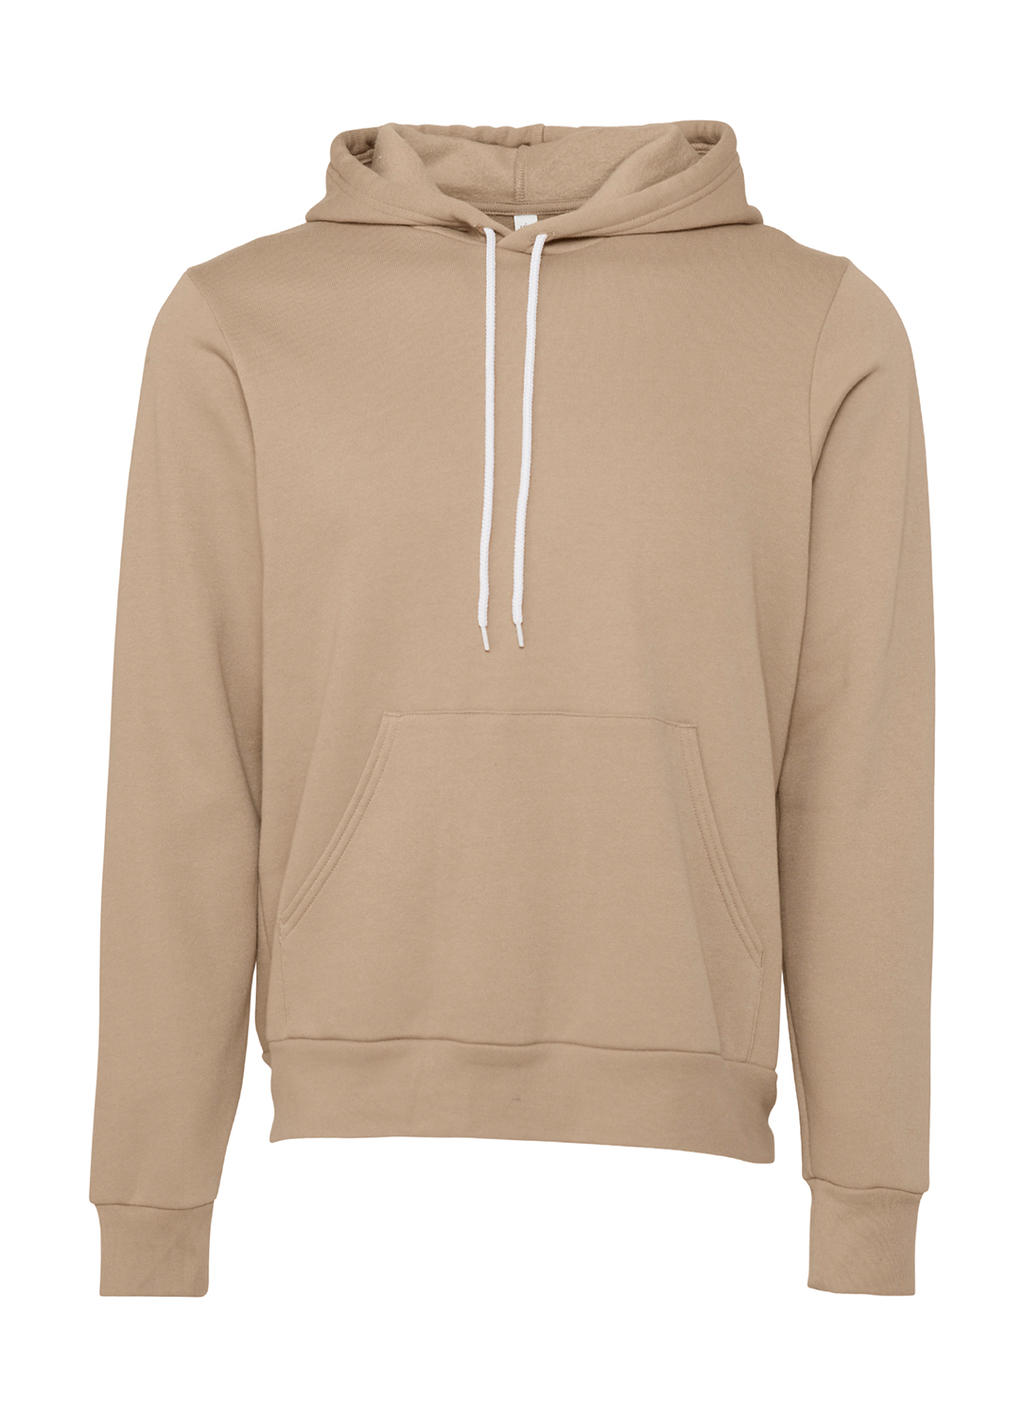  Unisex Poly-Cotton Pullover Hoodie in Farbe Tan